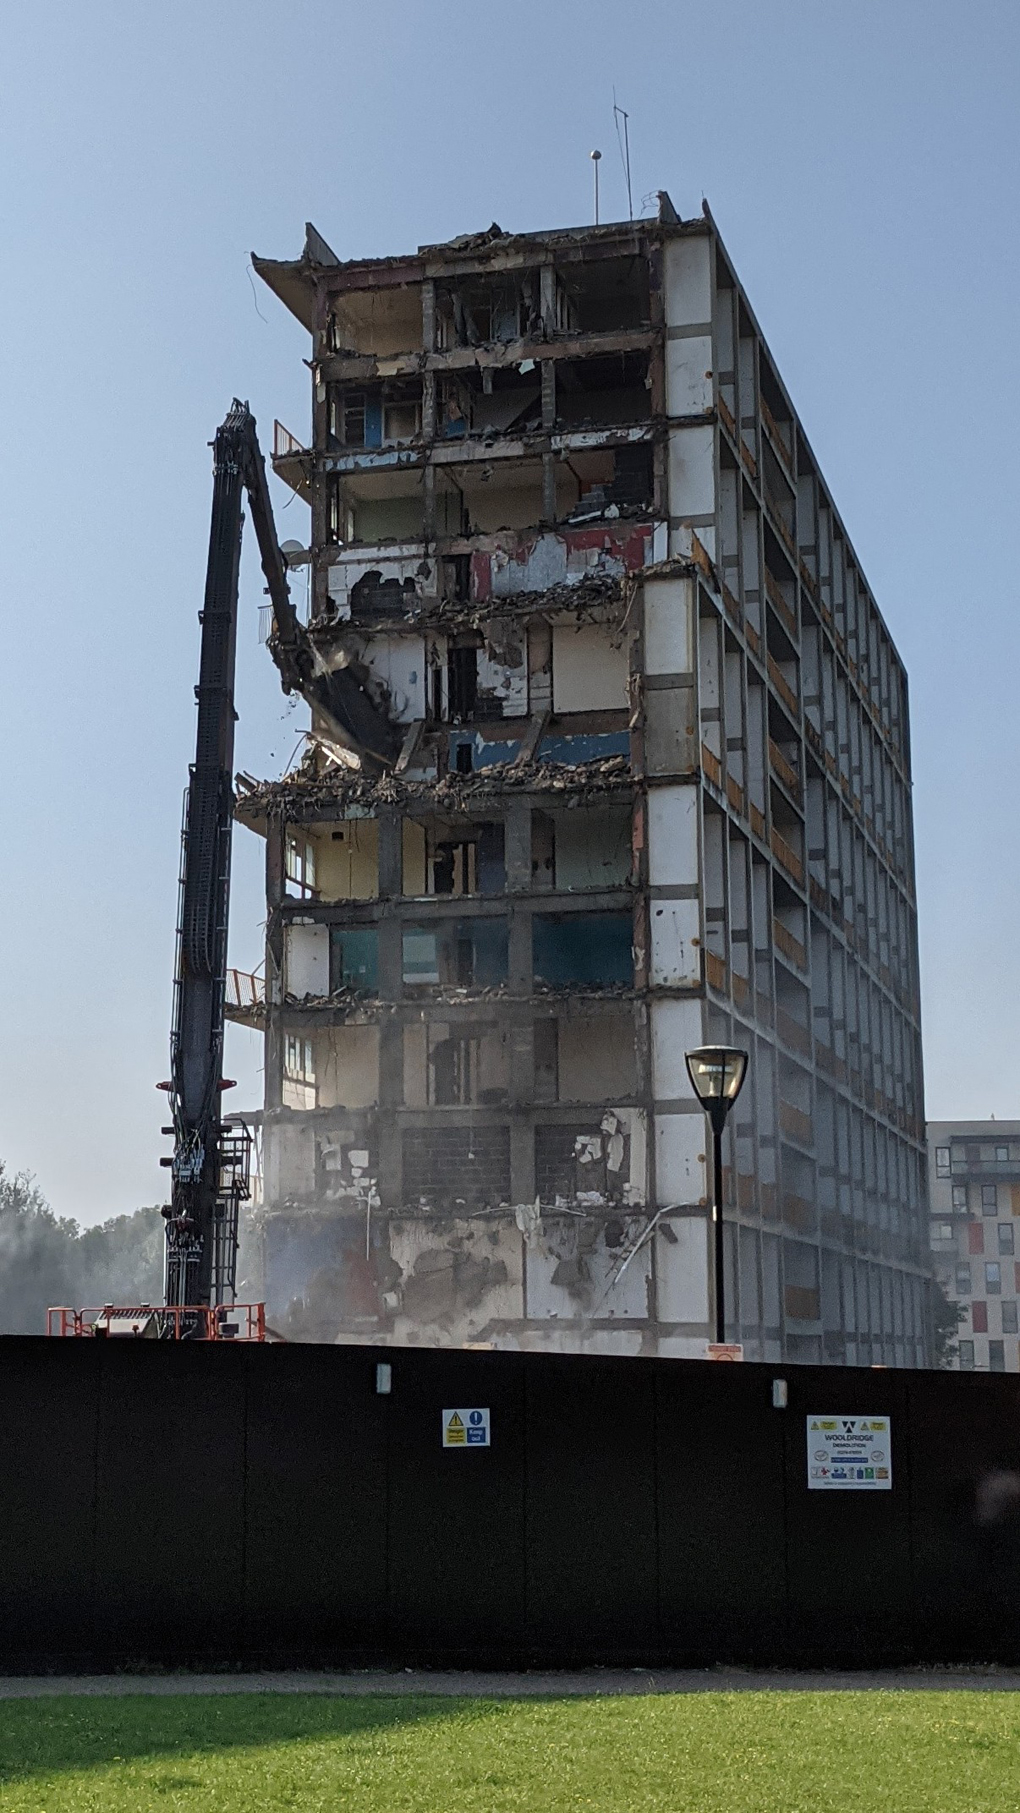 The block of flats, pictured in June's photograph, half-way through being demolished.